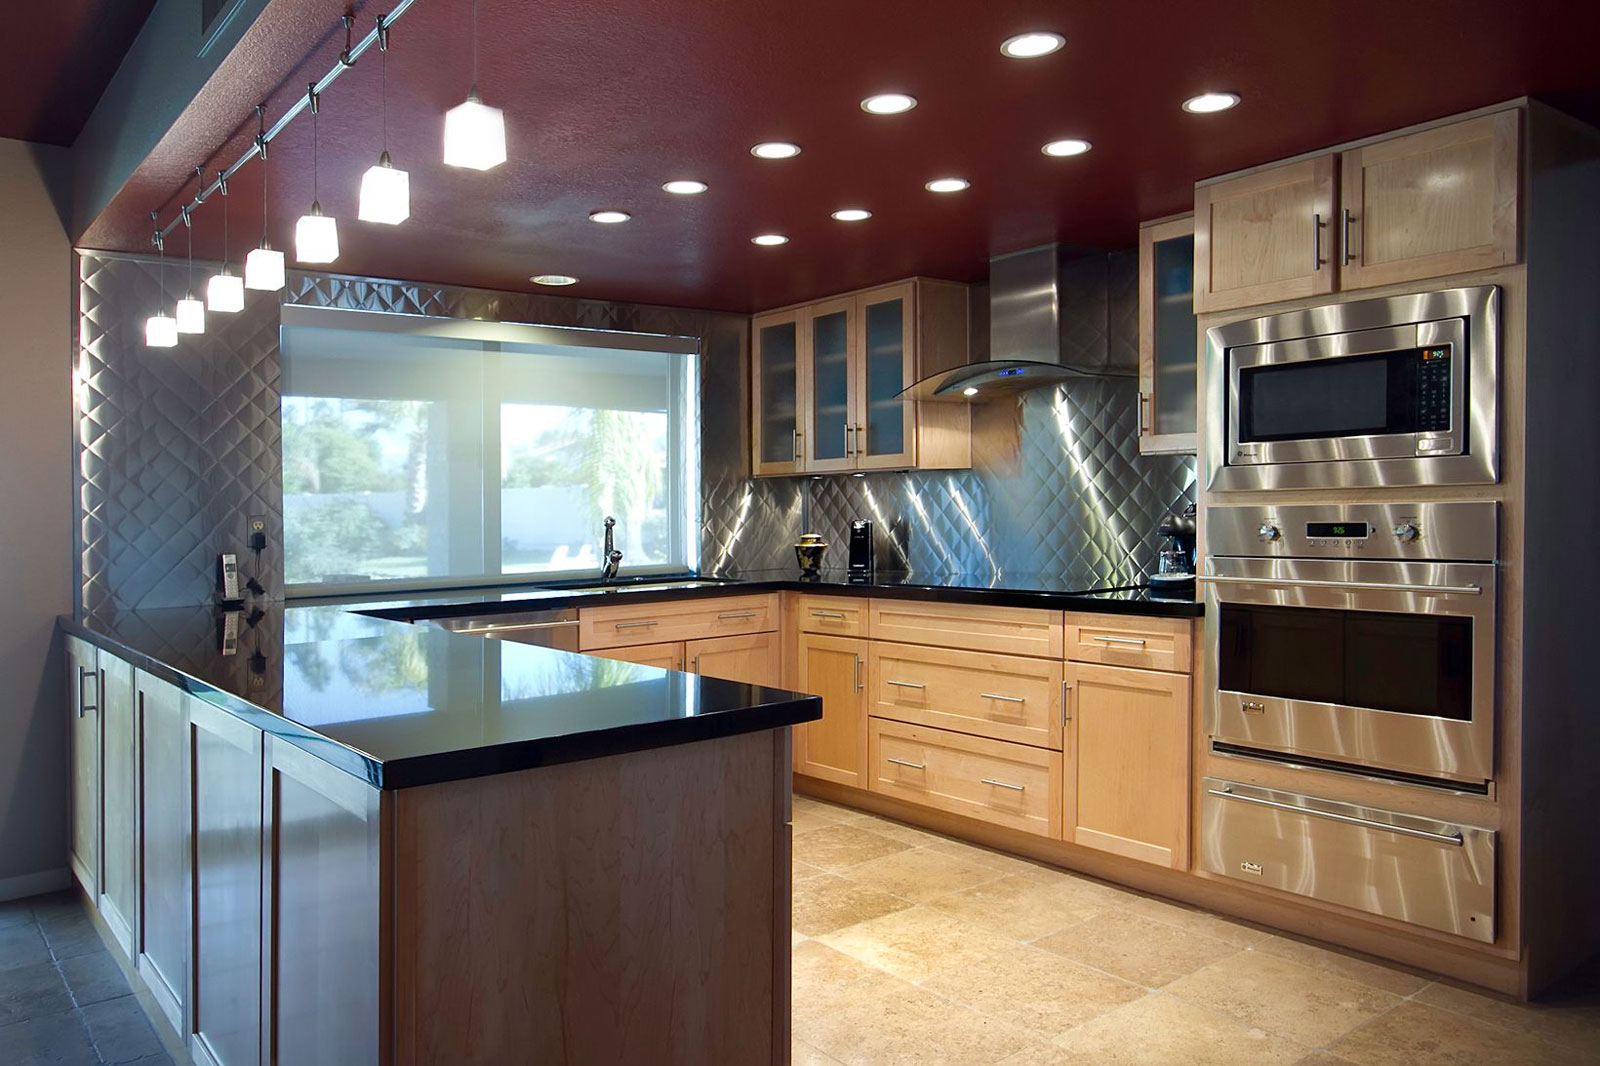 Modern Kitchen Ceilling Appealing Modern Kitchen Remodeling Applying Ceiling Lighting With Sectional Kitchen Cupboards Furnished With Sink And Electric Range And Completed With Ovens Kitchen The Stylish And Simplest Kitchen Remodeling Ways